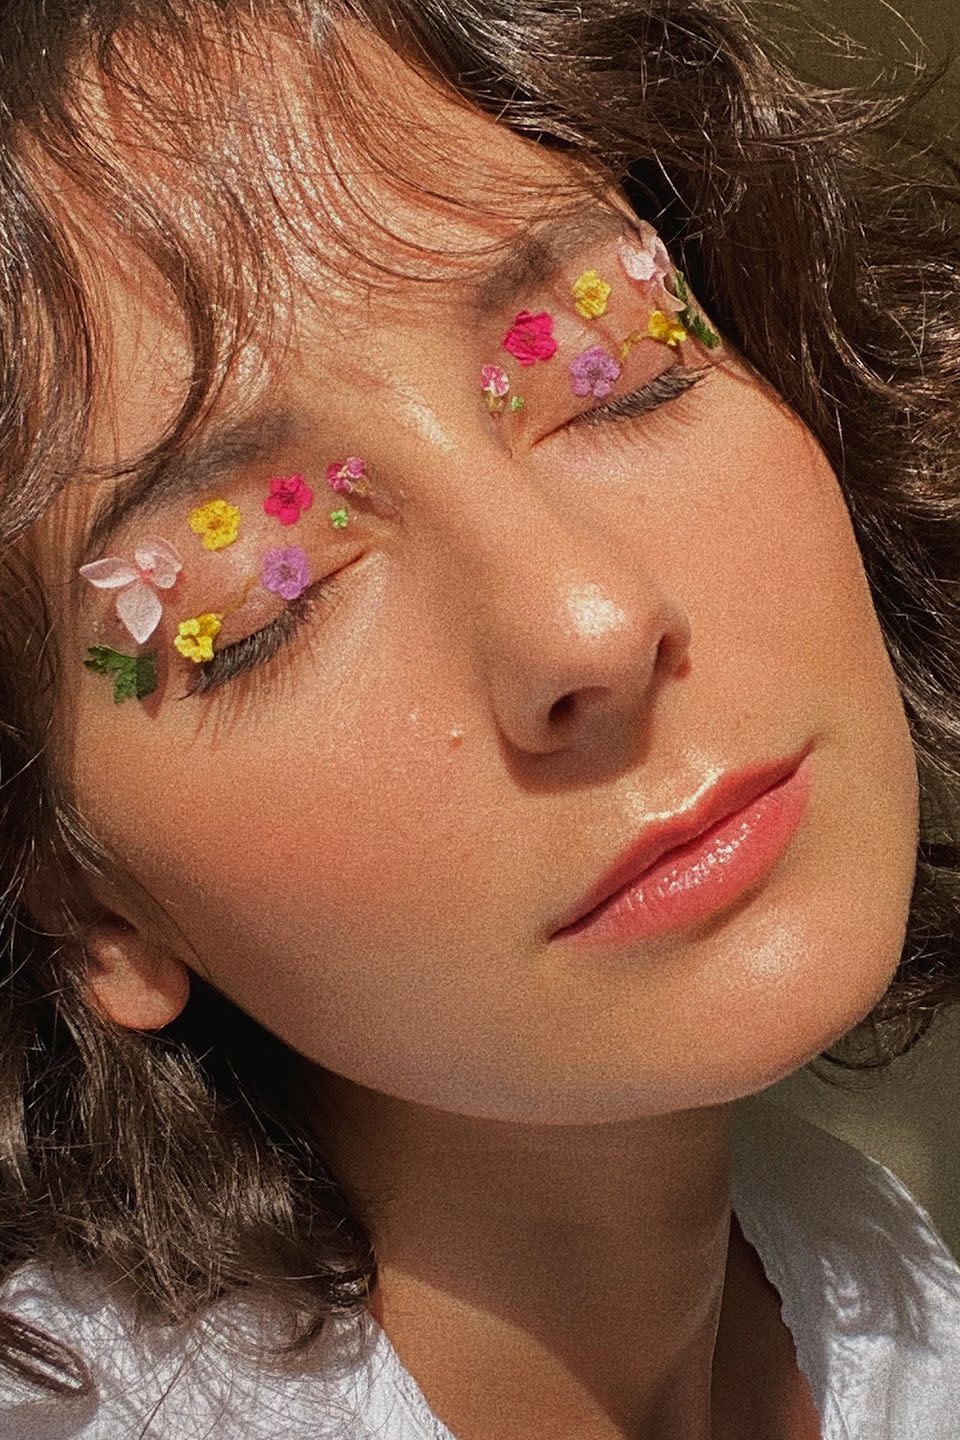 2) These Flowerly Lids for Eye Art